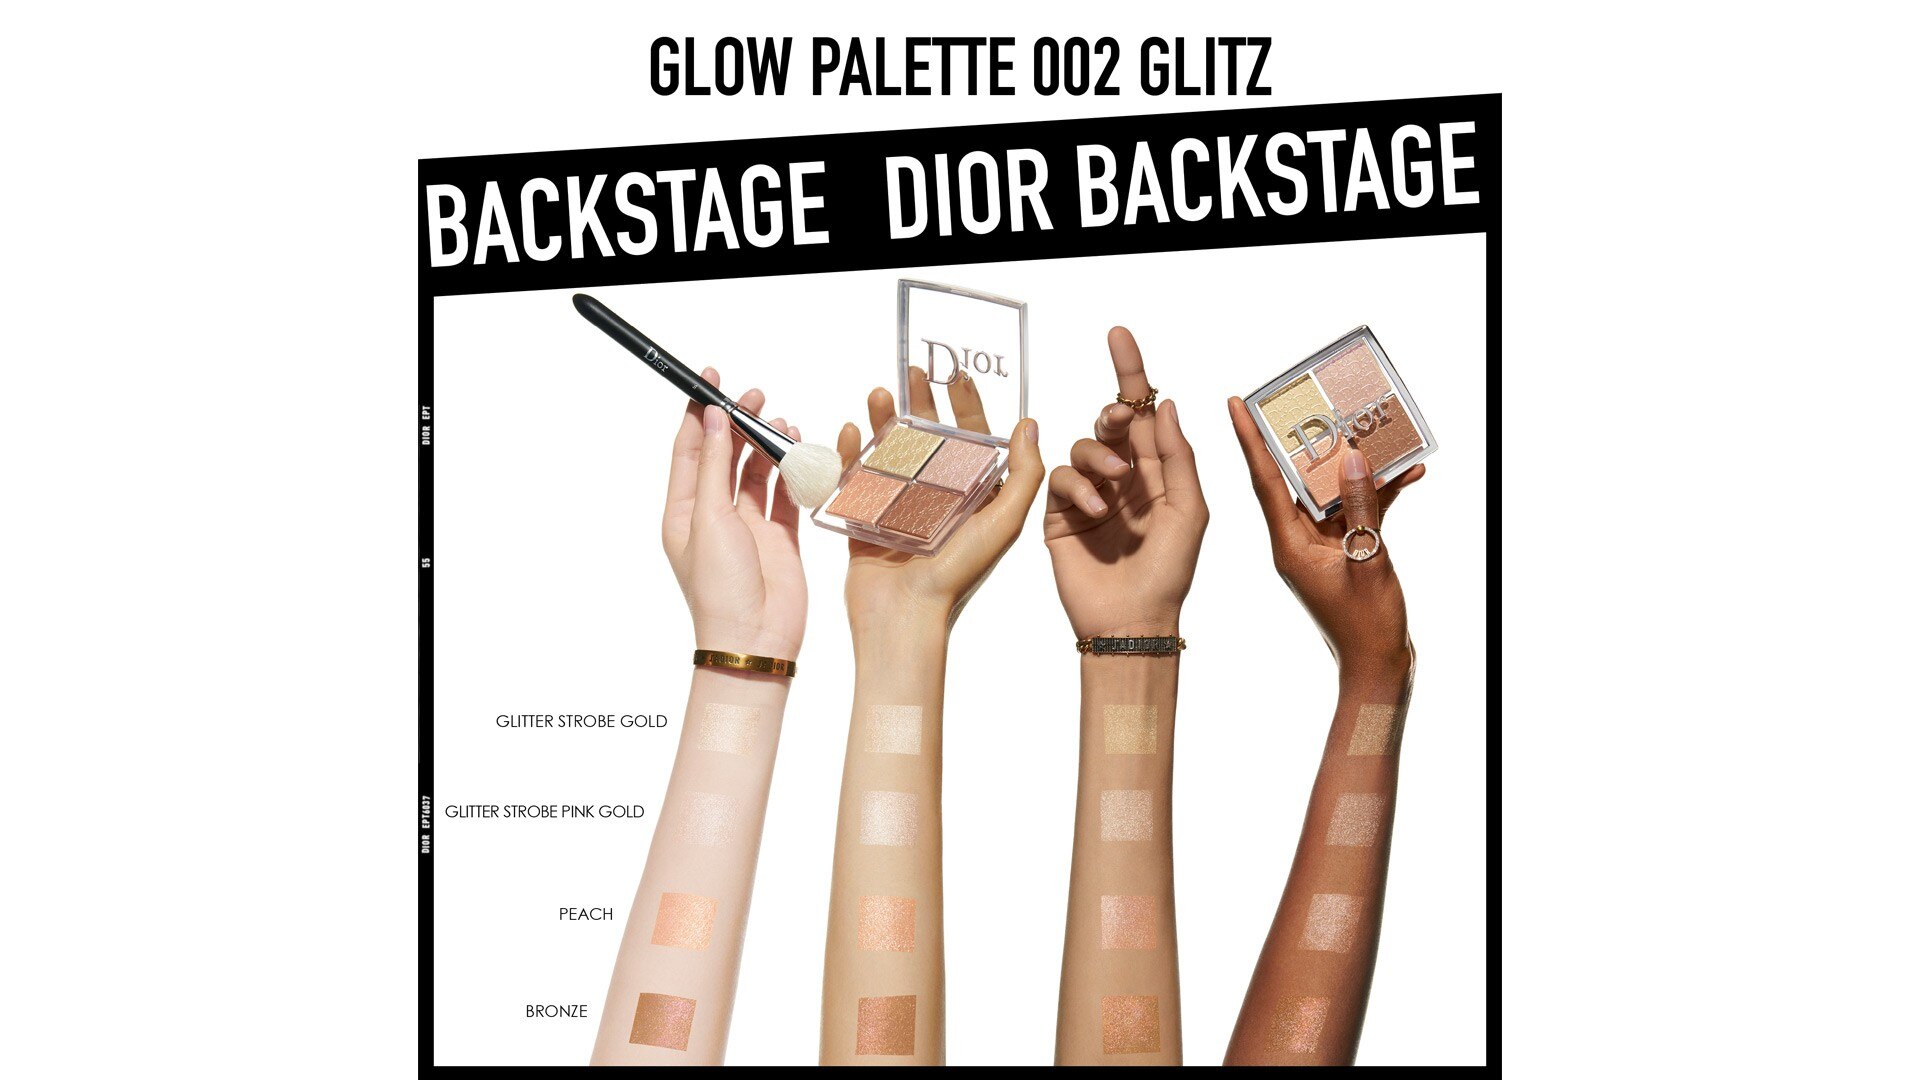 Give Dior Backstage Face & Body Primer - Holiday Gift Idea